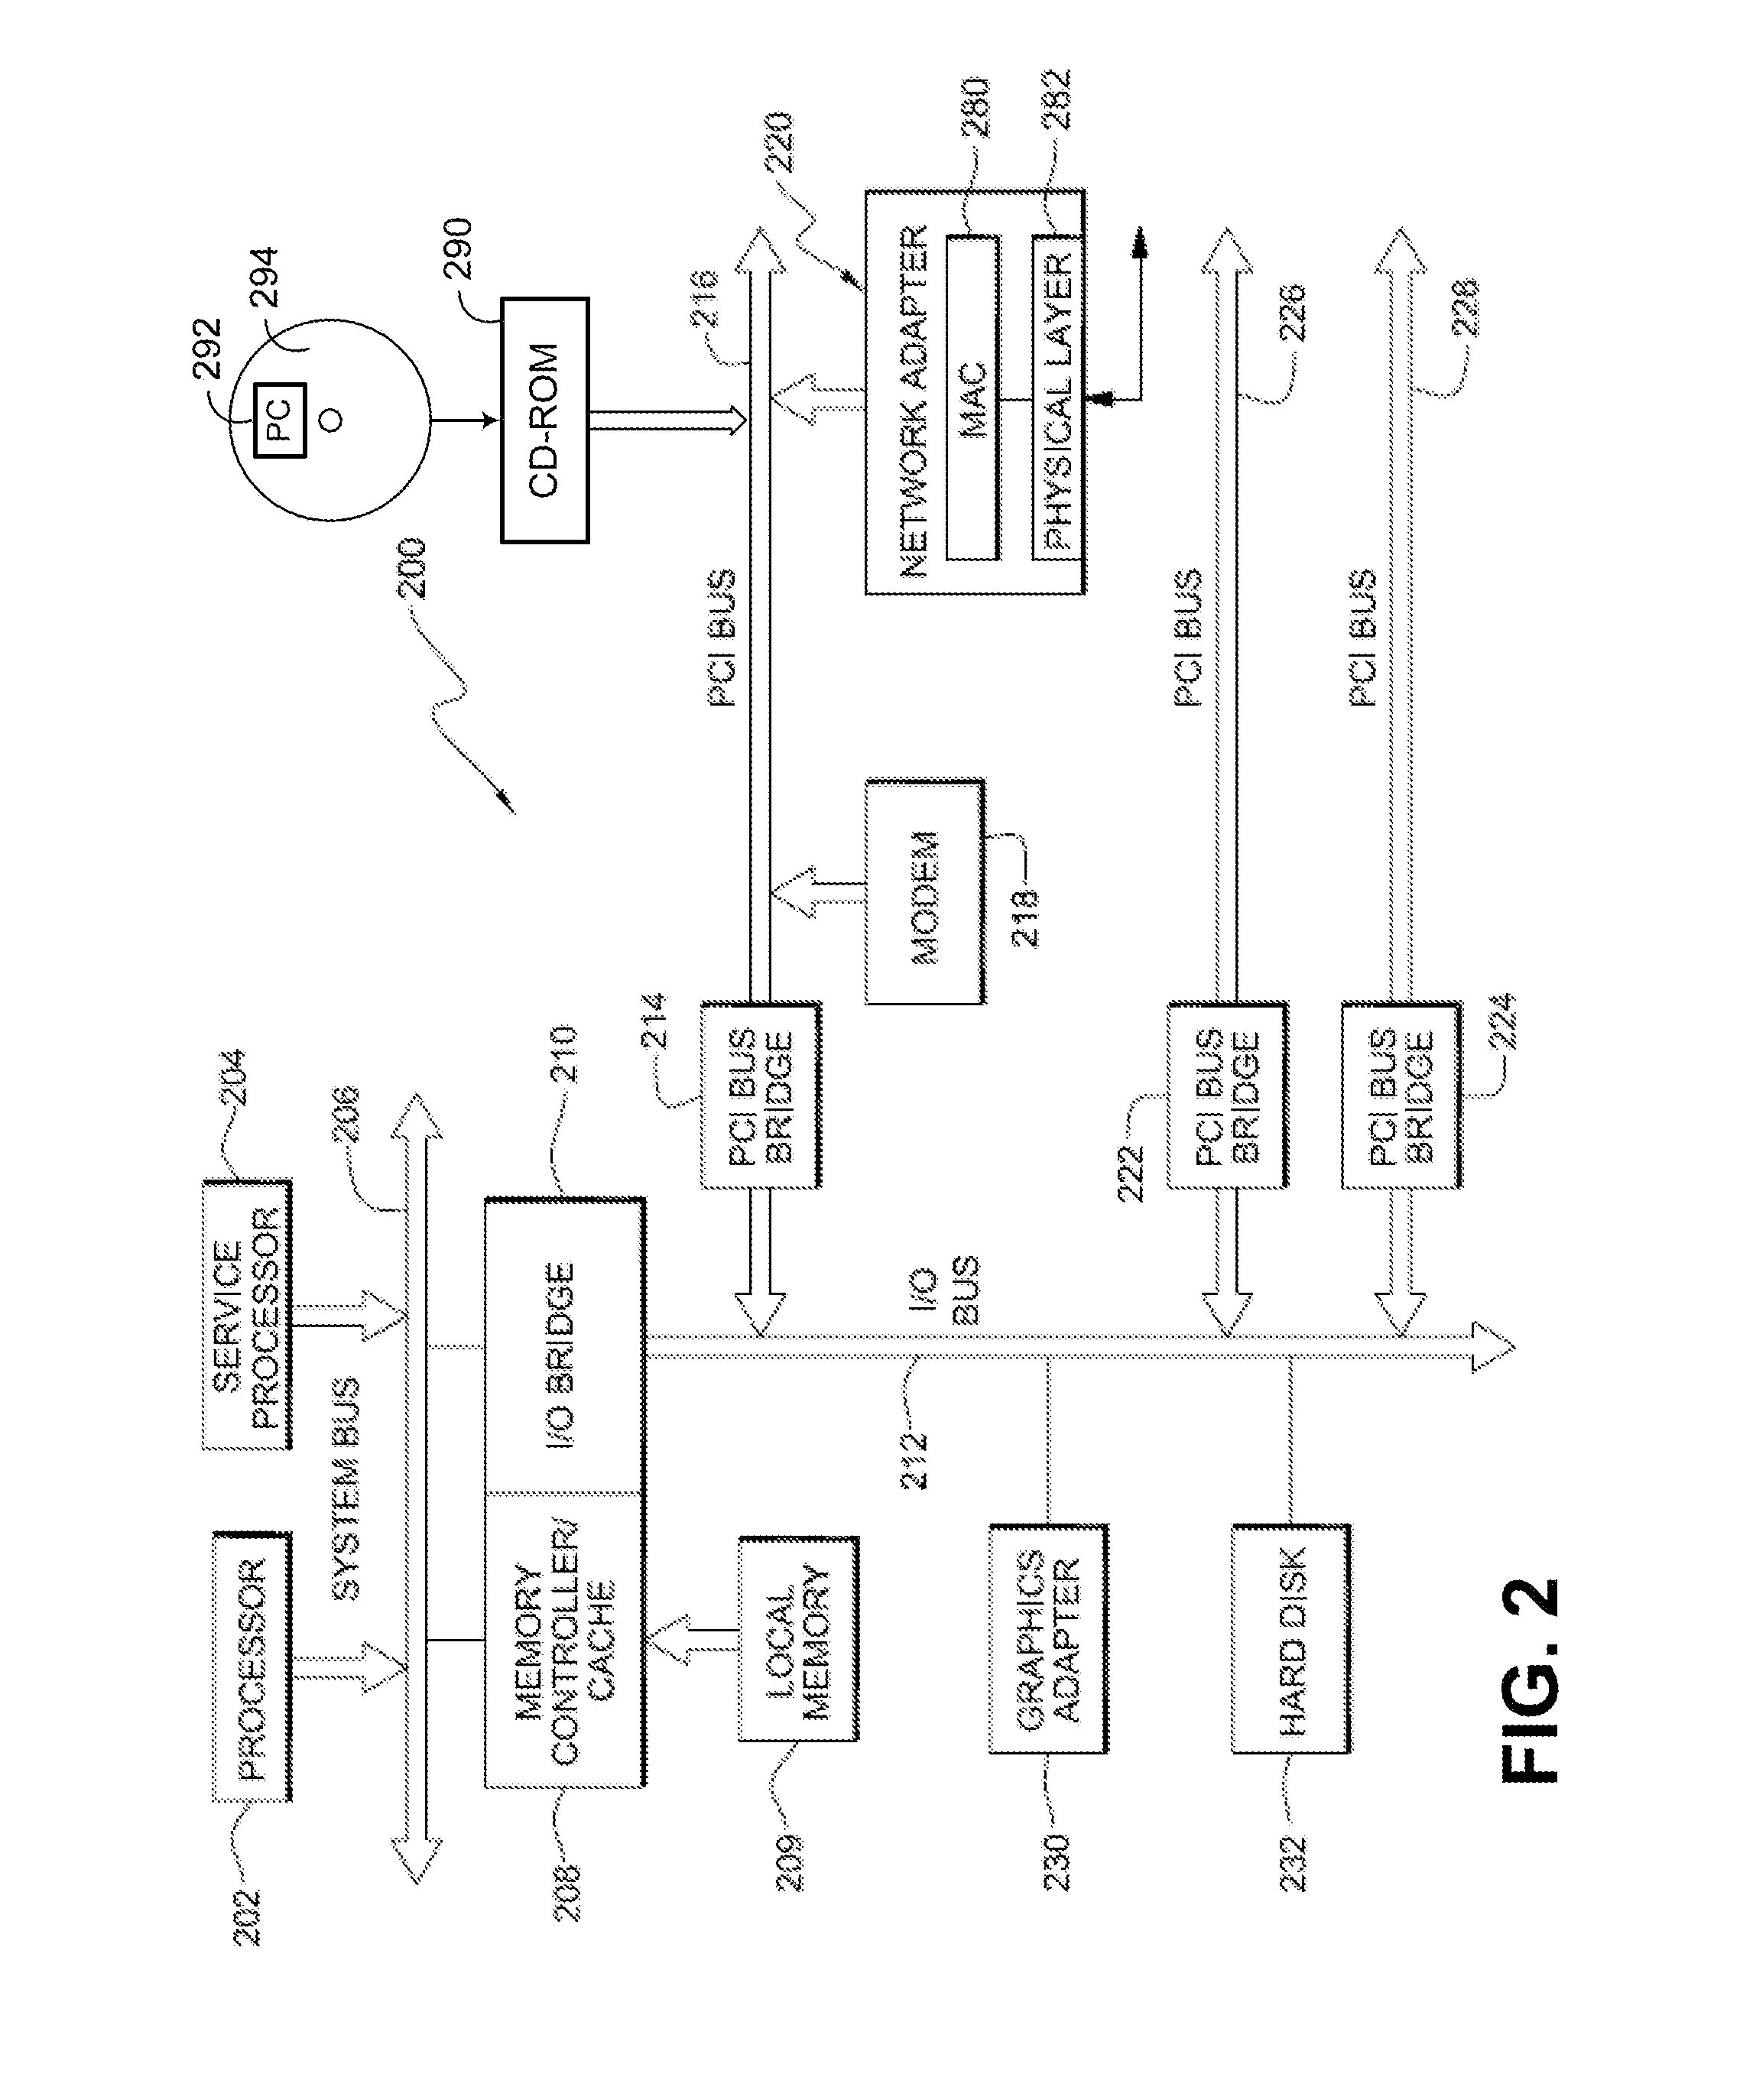 Adjunct partition work scheduling with quality of service attributes